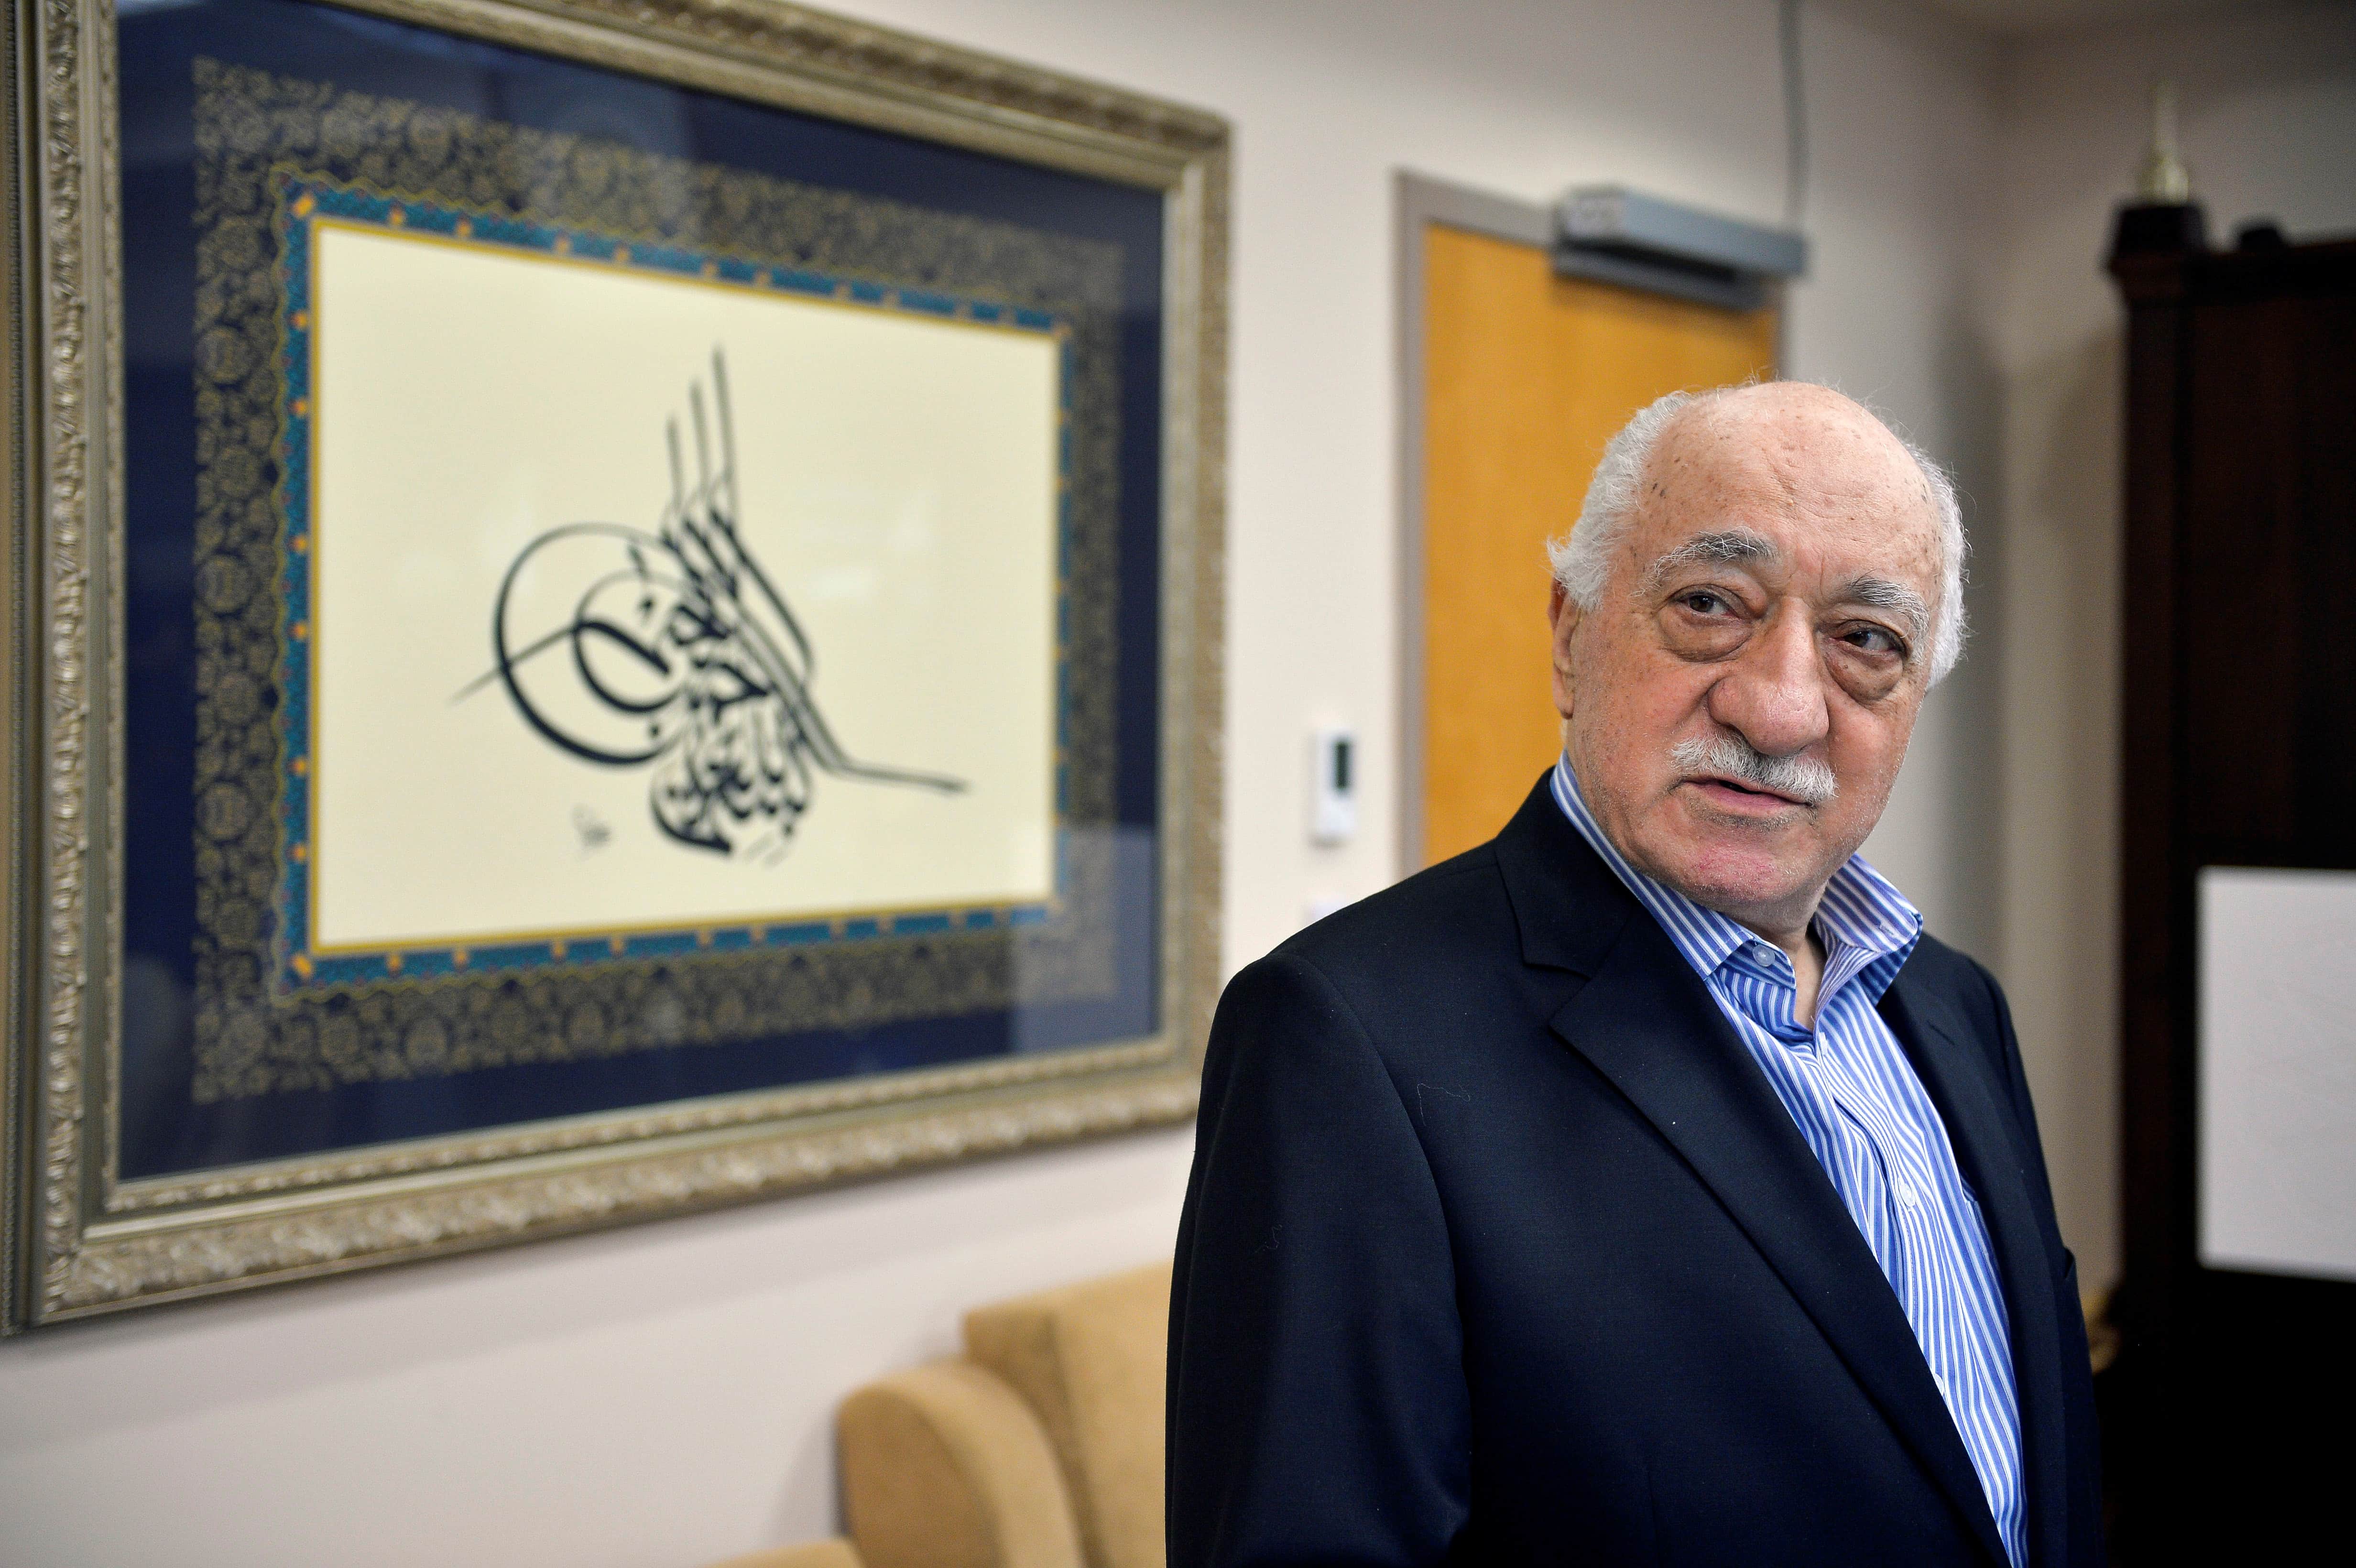 U.S. based cleric Fethullah Gulen at his home in Saylorsburg, Pennsylvania, 29 July 2016, REUTERS/Charles Mostoller/File Photo